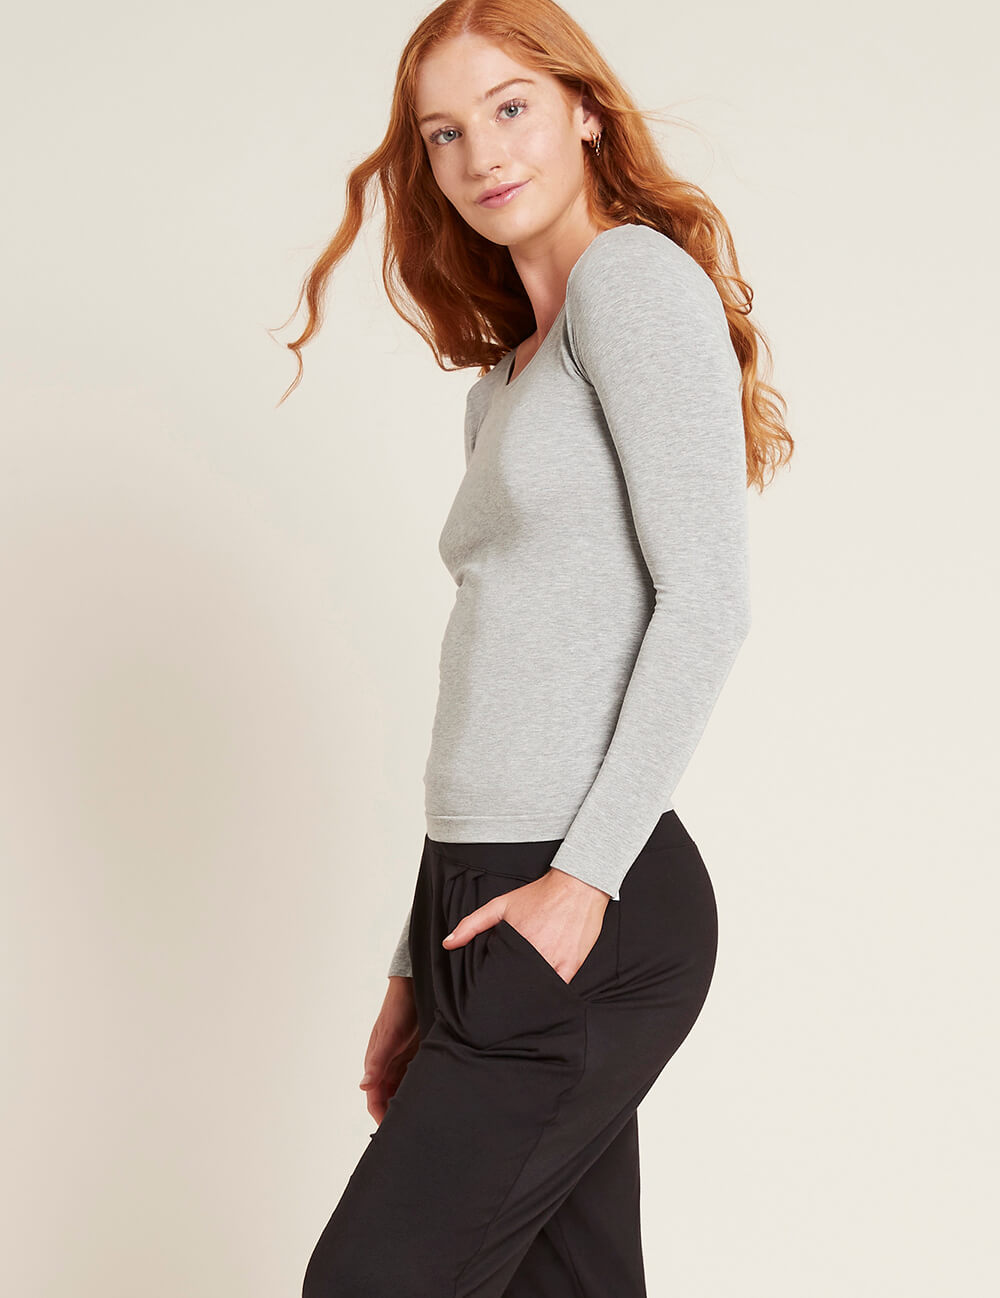 Boody Bamboo Women's Long Sleeve Top in Light Grey Side View